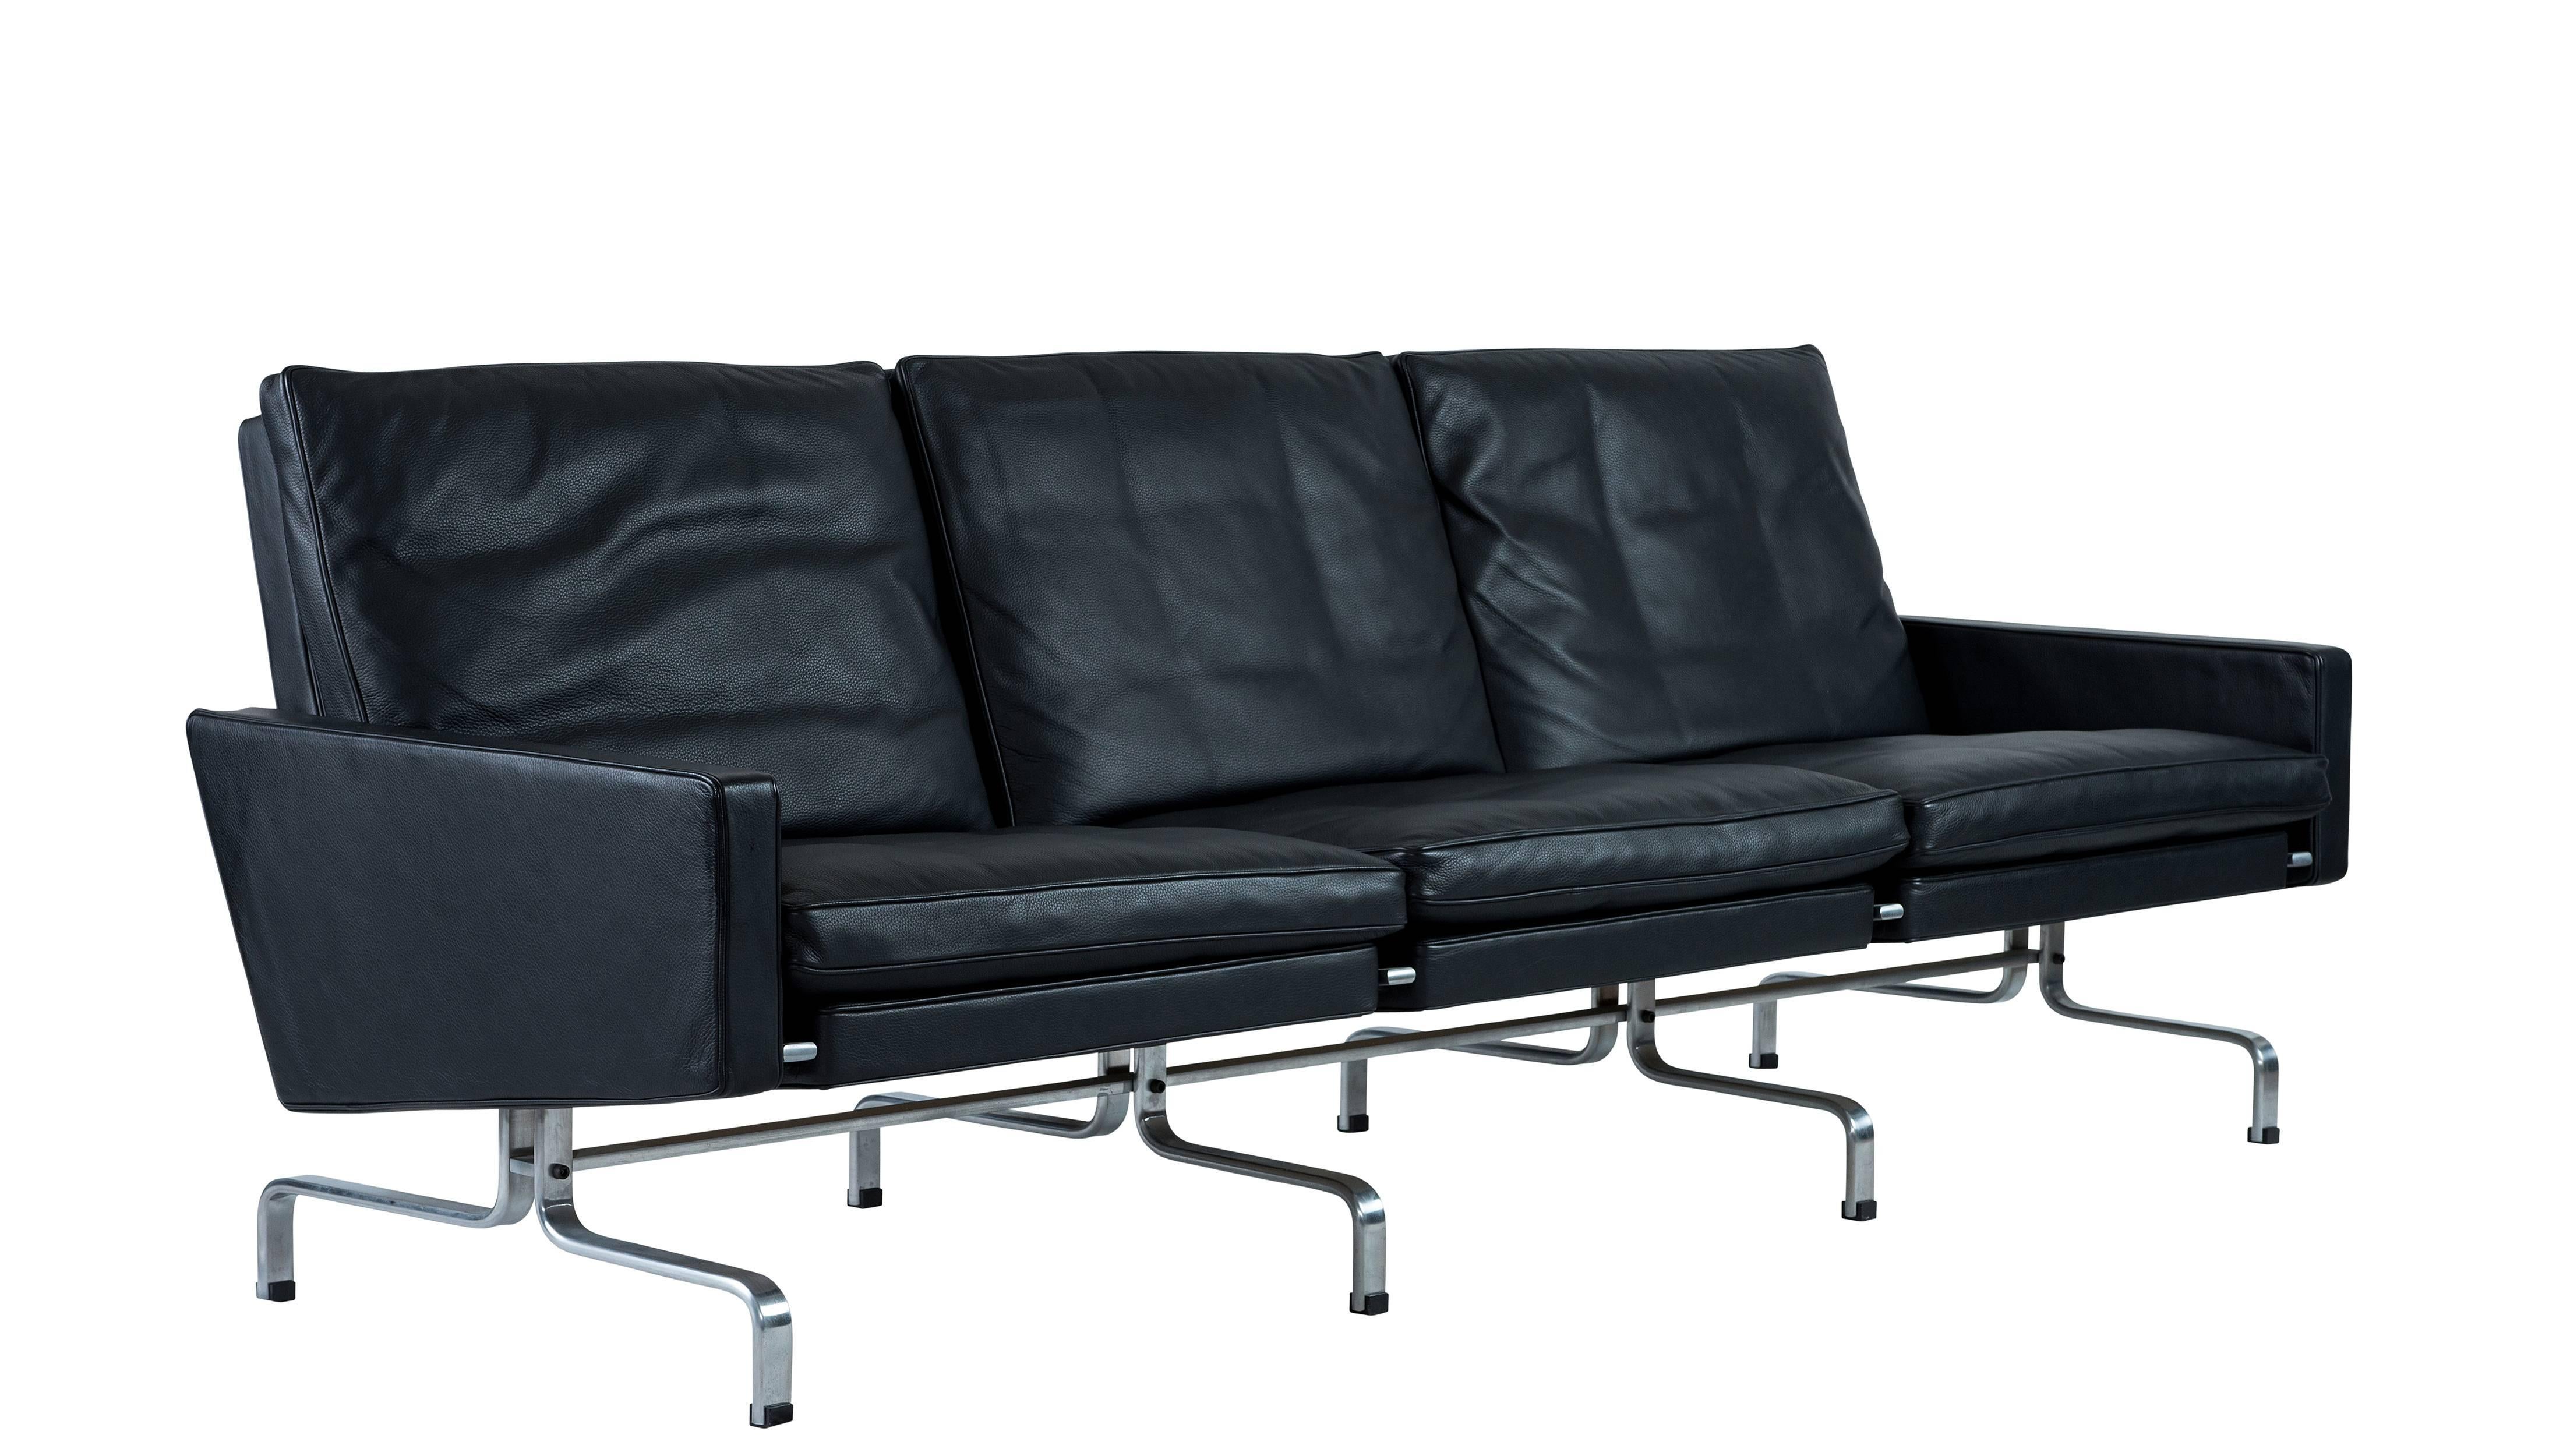 Poul Kjaerholm PK31 three-seat sofa designed in 1958 and produced by Fritz Hansen in 2007. We have another matching sofa available.